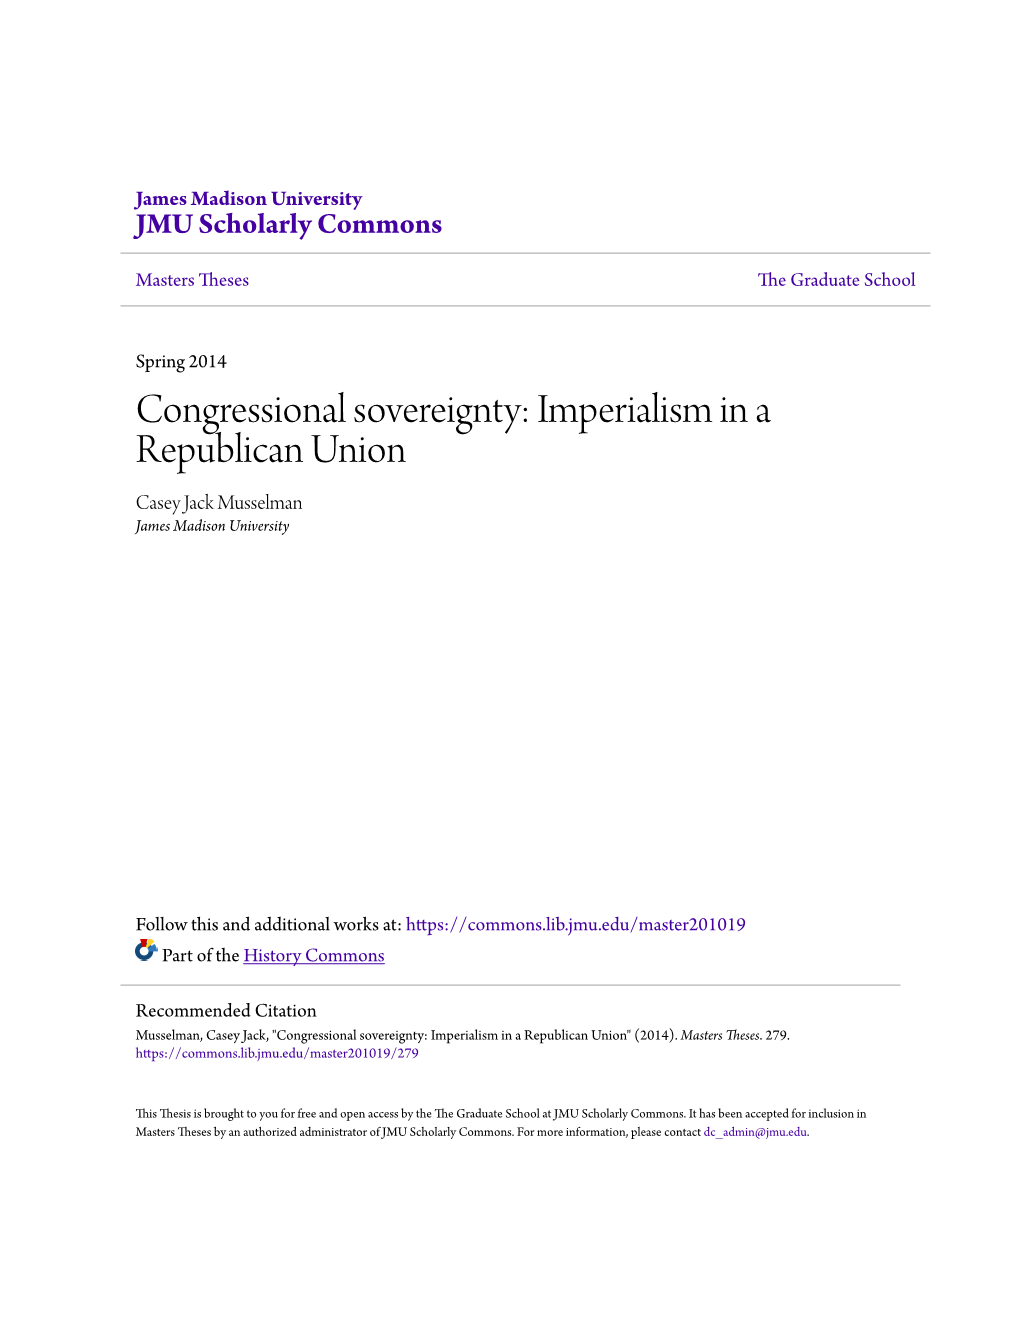 Congressional Sovereignty: Imperialism in a Republican Union Casey Jack Musselman James Madison University